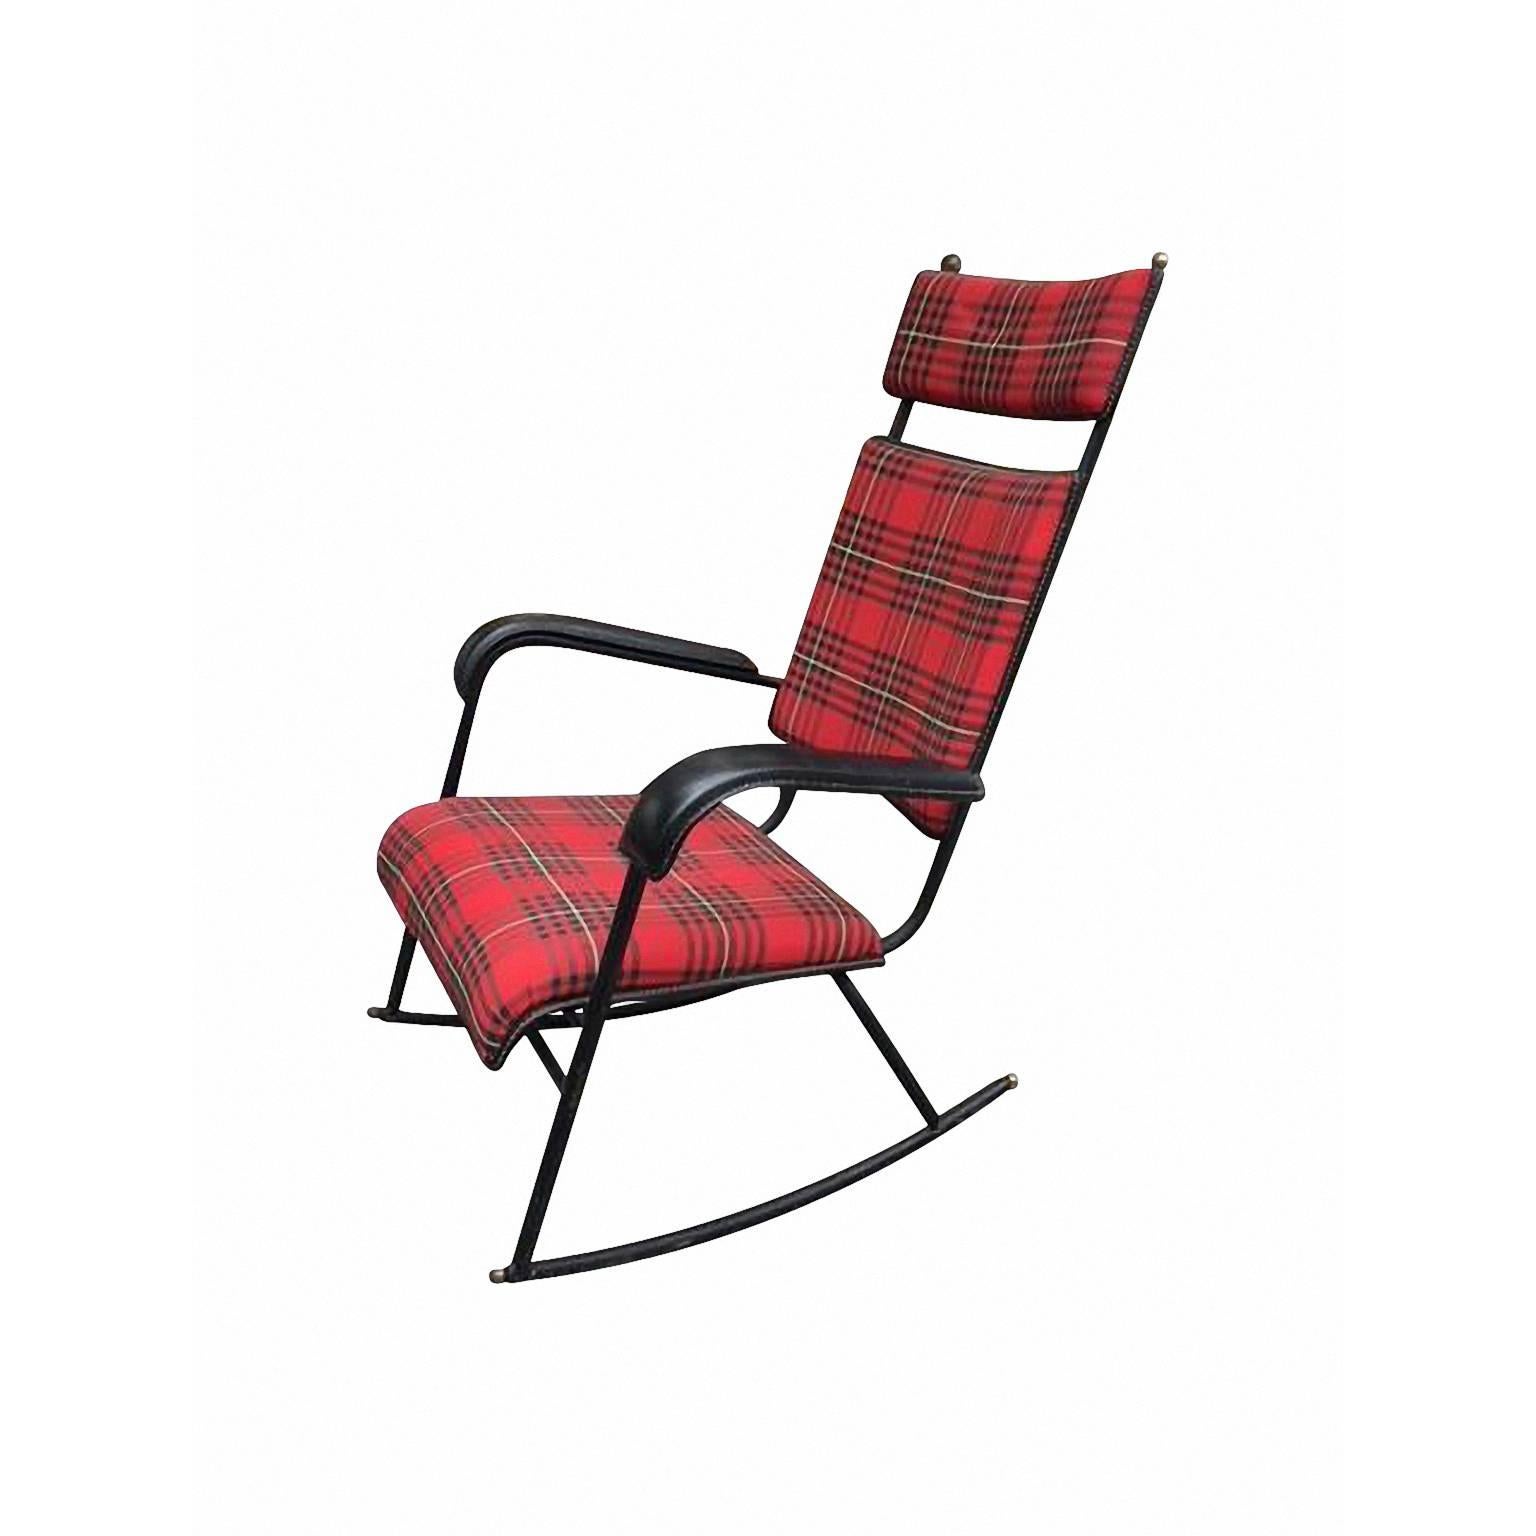 Jacques Adnet (1900-1904) 
Rare rocking-chair with original Tartan upholstery. Black faux leather arms.
France, circa 1950.

Litterature:
- GUTKNECHT Patrick, Jacques Adnet, Galerie Patrick Gutknecht, Paris, 2010, p. 73
Measures: Height 103